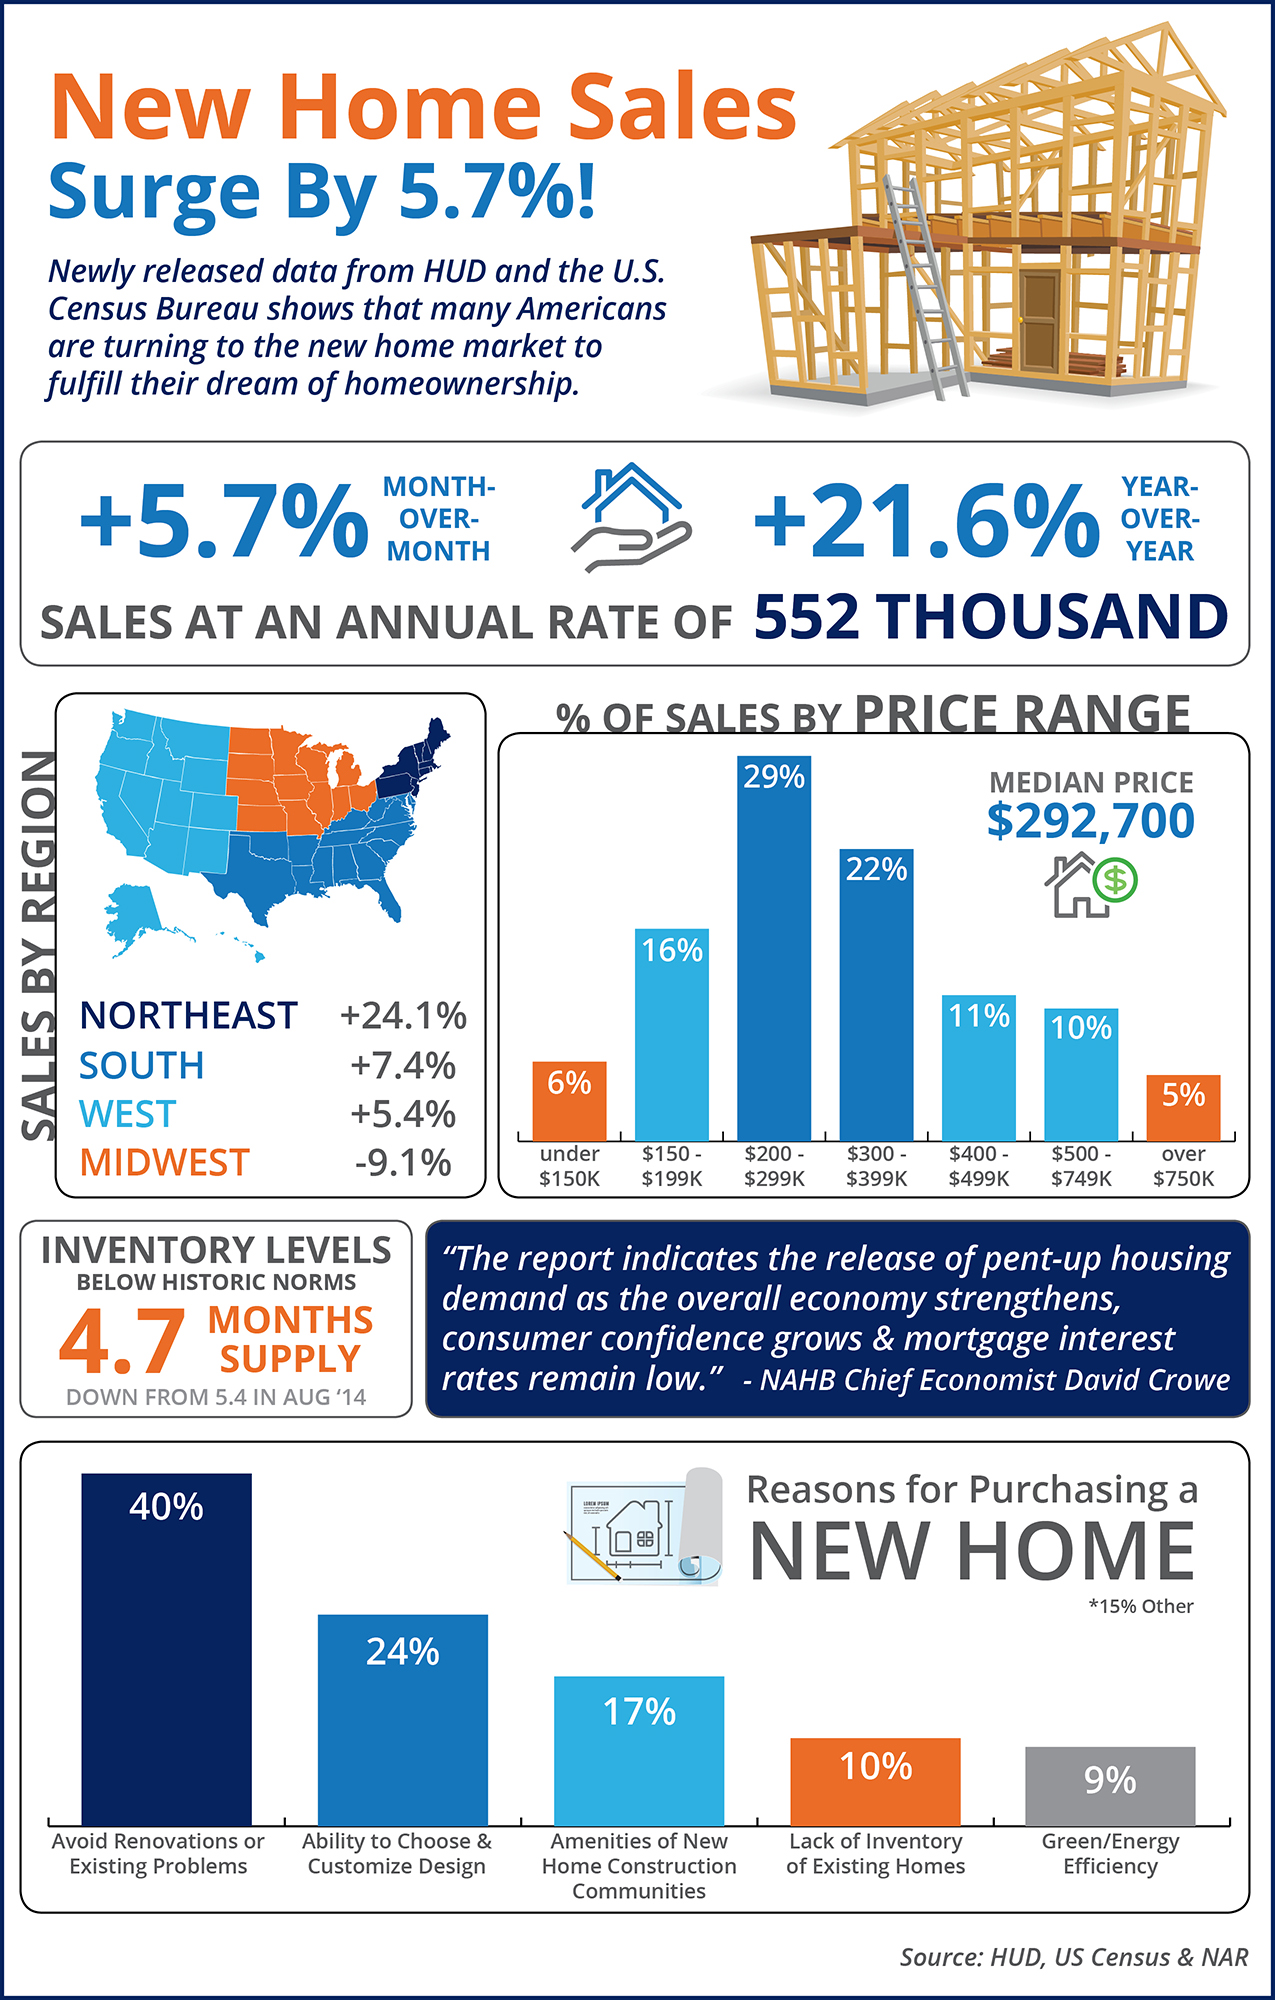 New Home Sales Surge By 5.7%! | Simplifying The Market